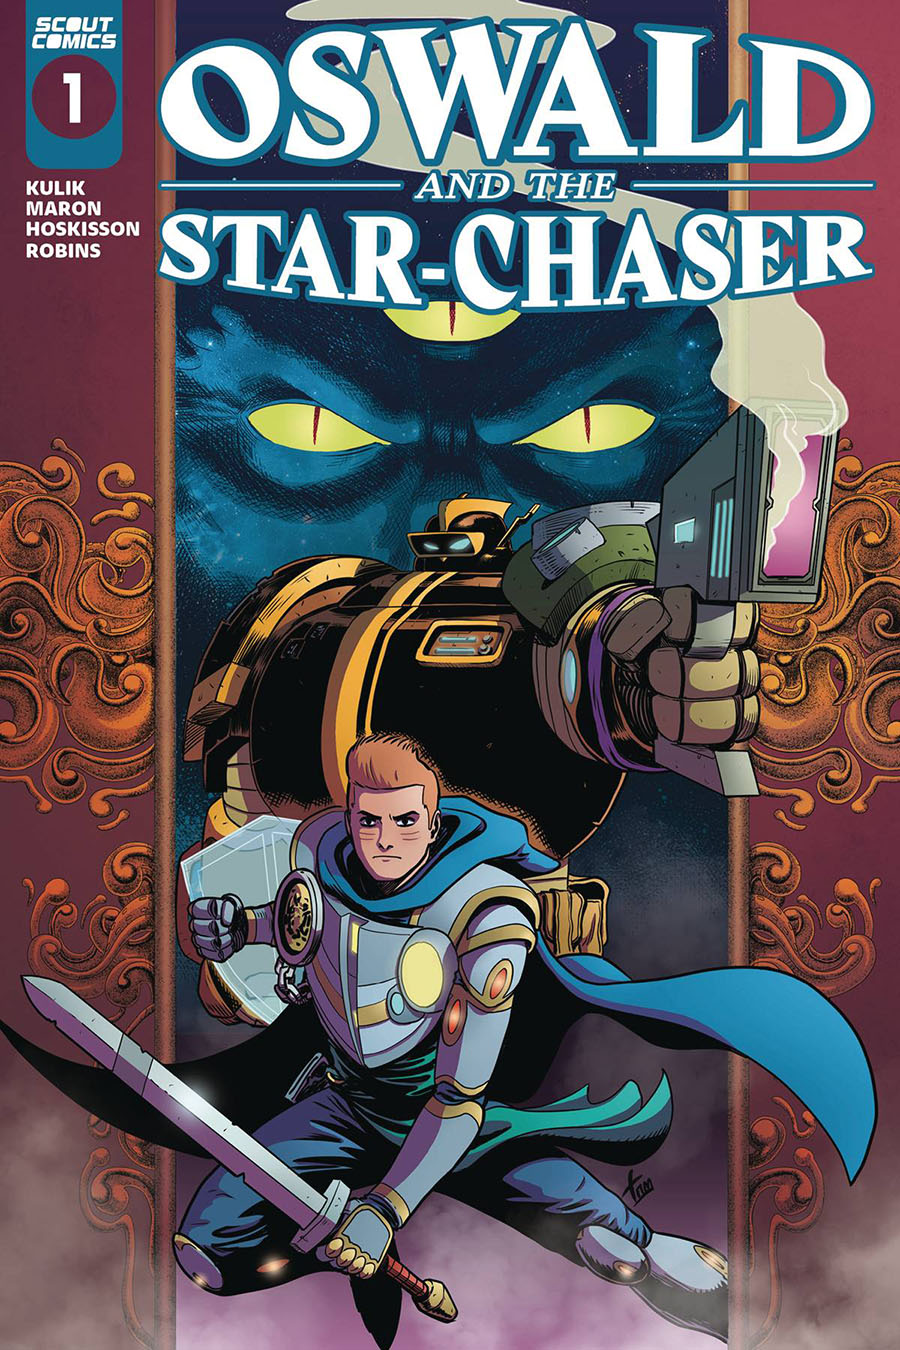 Oswald And The Star-Chaser #1 Cover A Regular Tom Hoskisson Cover